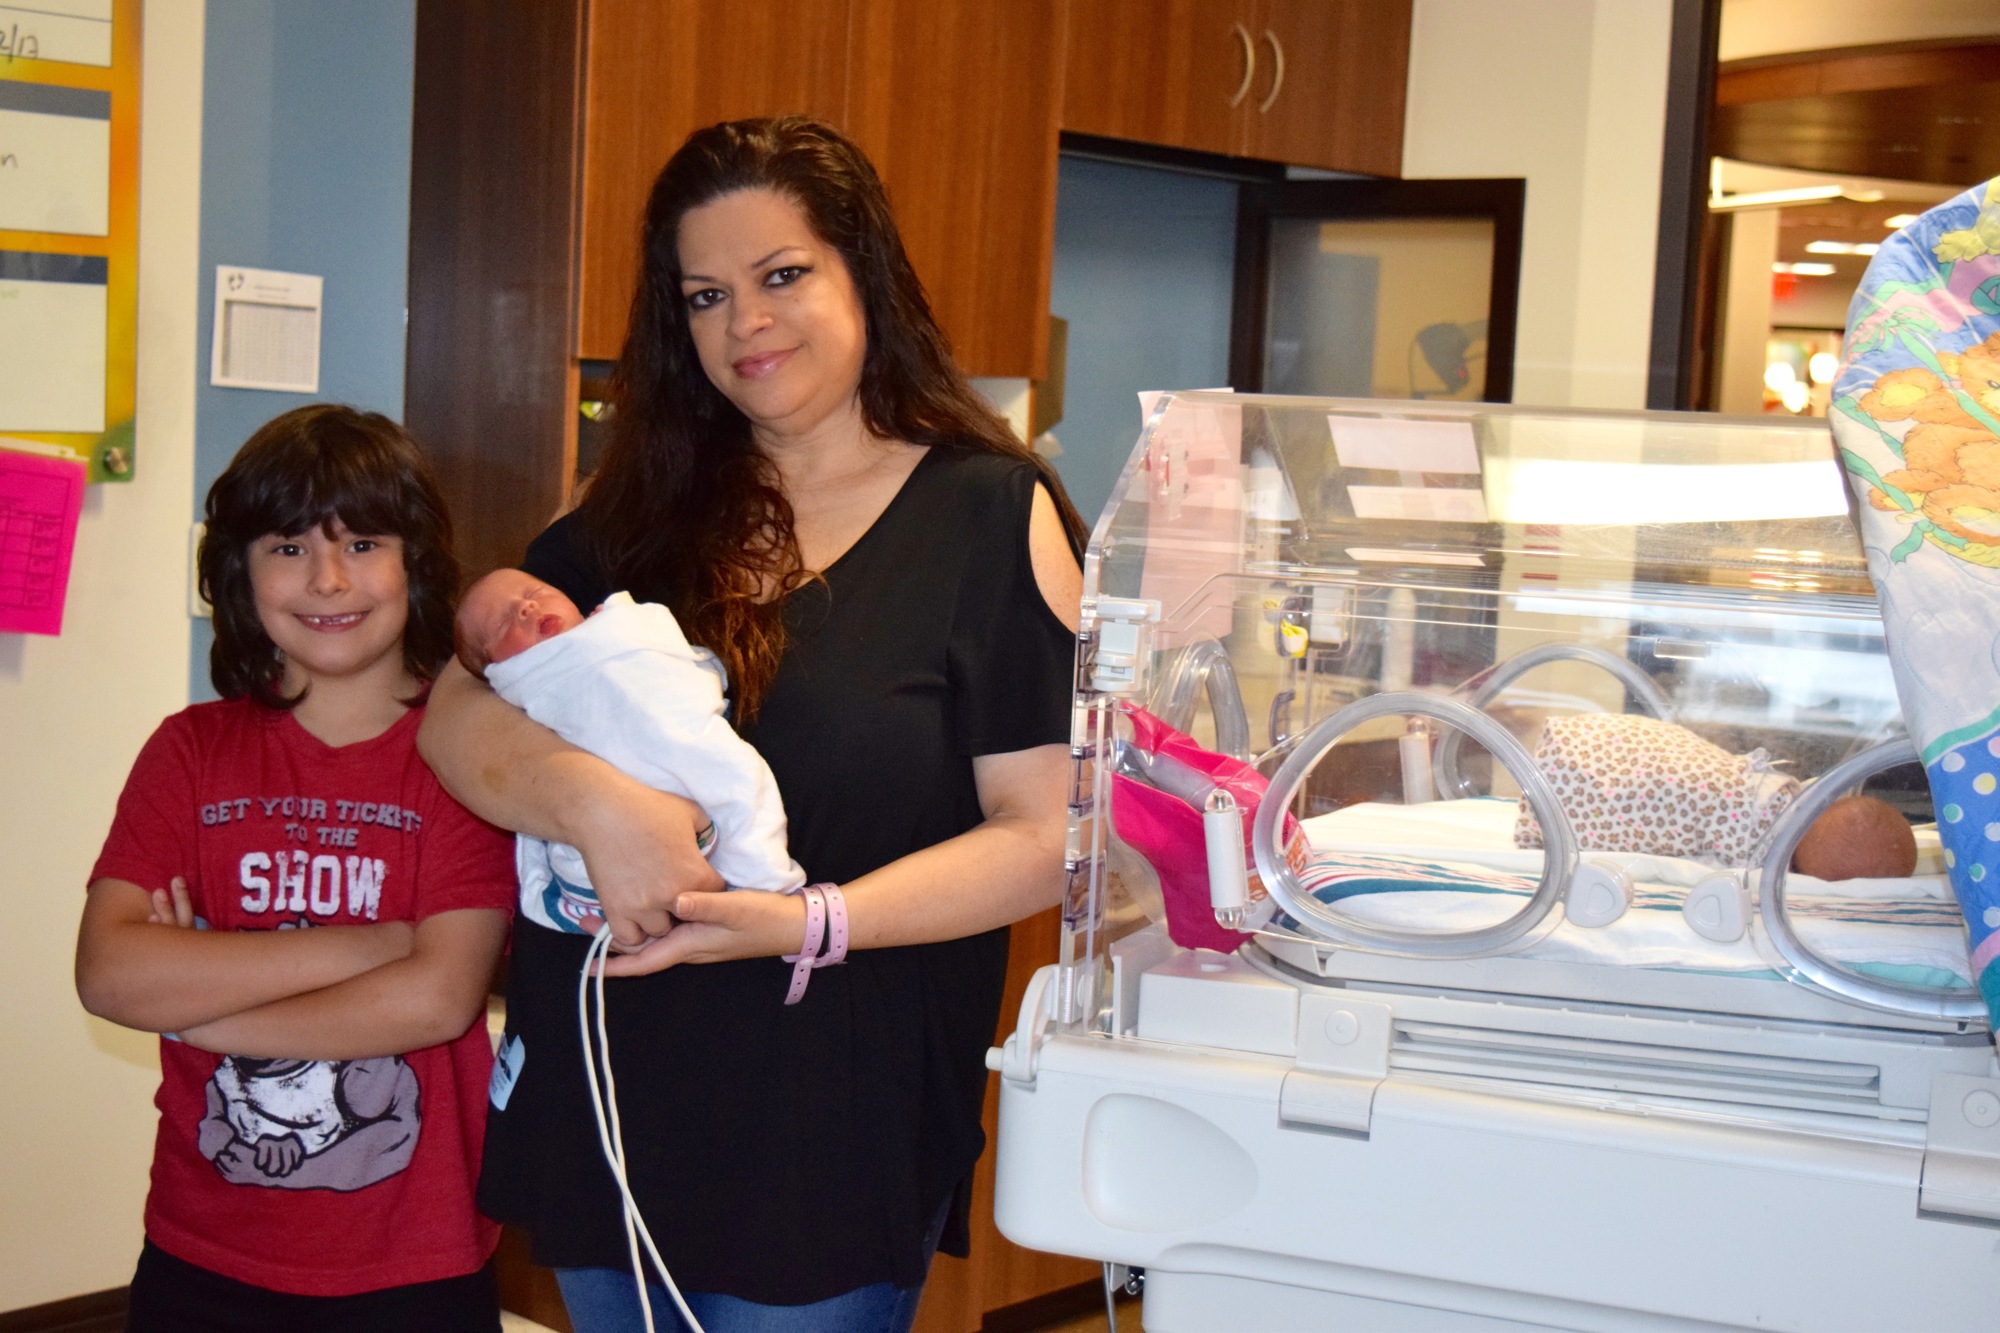 After a long hospital stay, Diana Platon — with youngest son, Jax, and twin daughters, Jeena and Jianna — delivered her twins at 32 weeks.